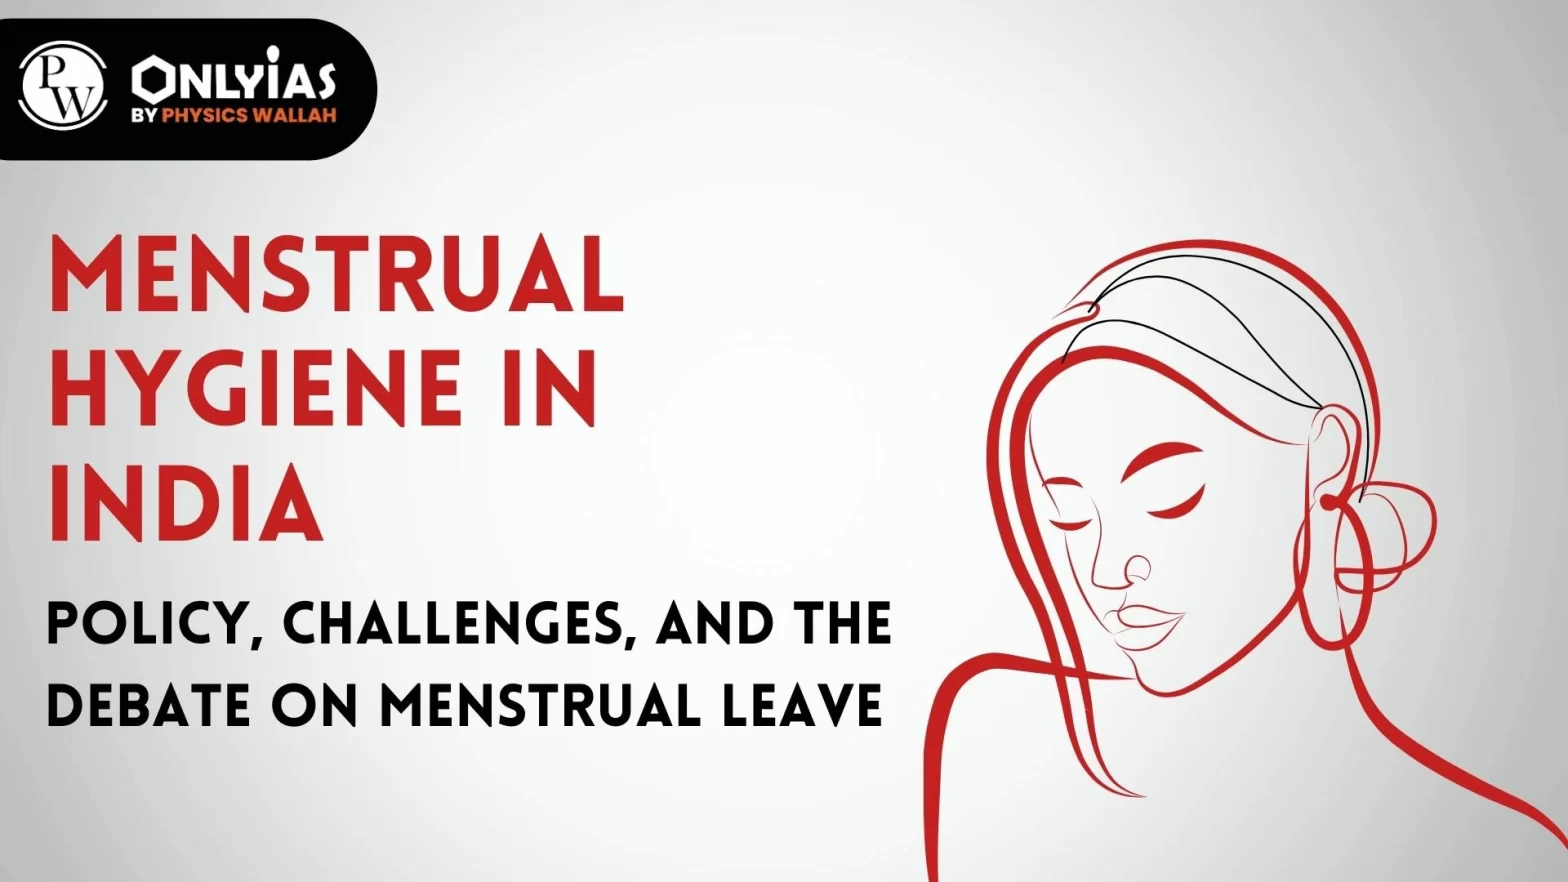 Menstrual Hygiene in India: Policy, Challenges, and the Debate on Menstrual Leave